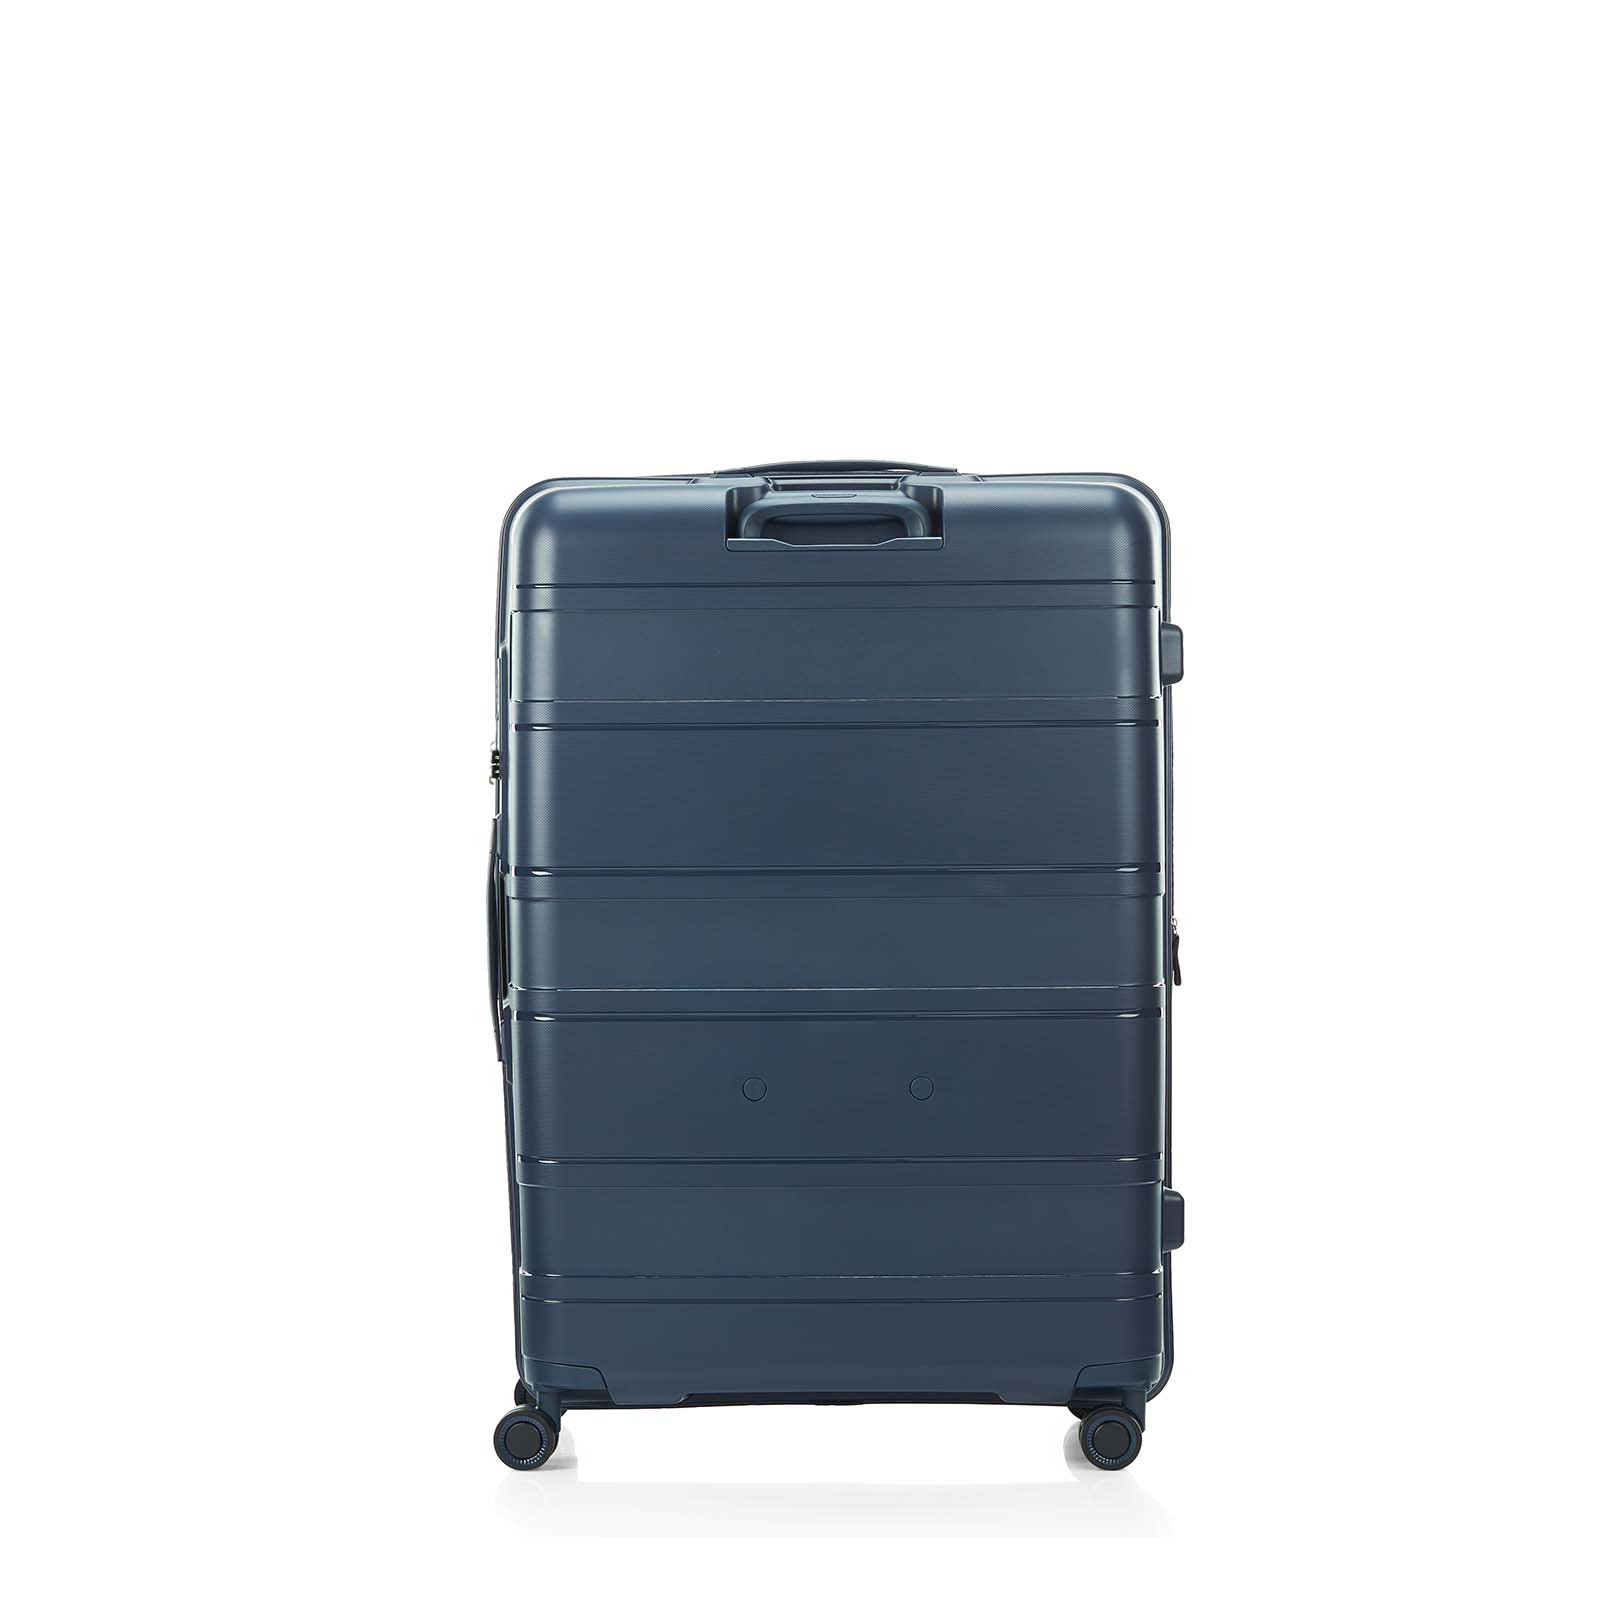 American-Tourister-Light-Max-82cm-Suitcase-Navy-Back